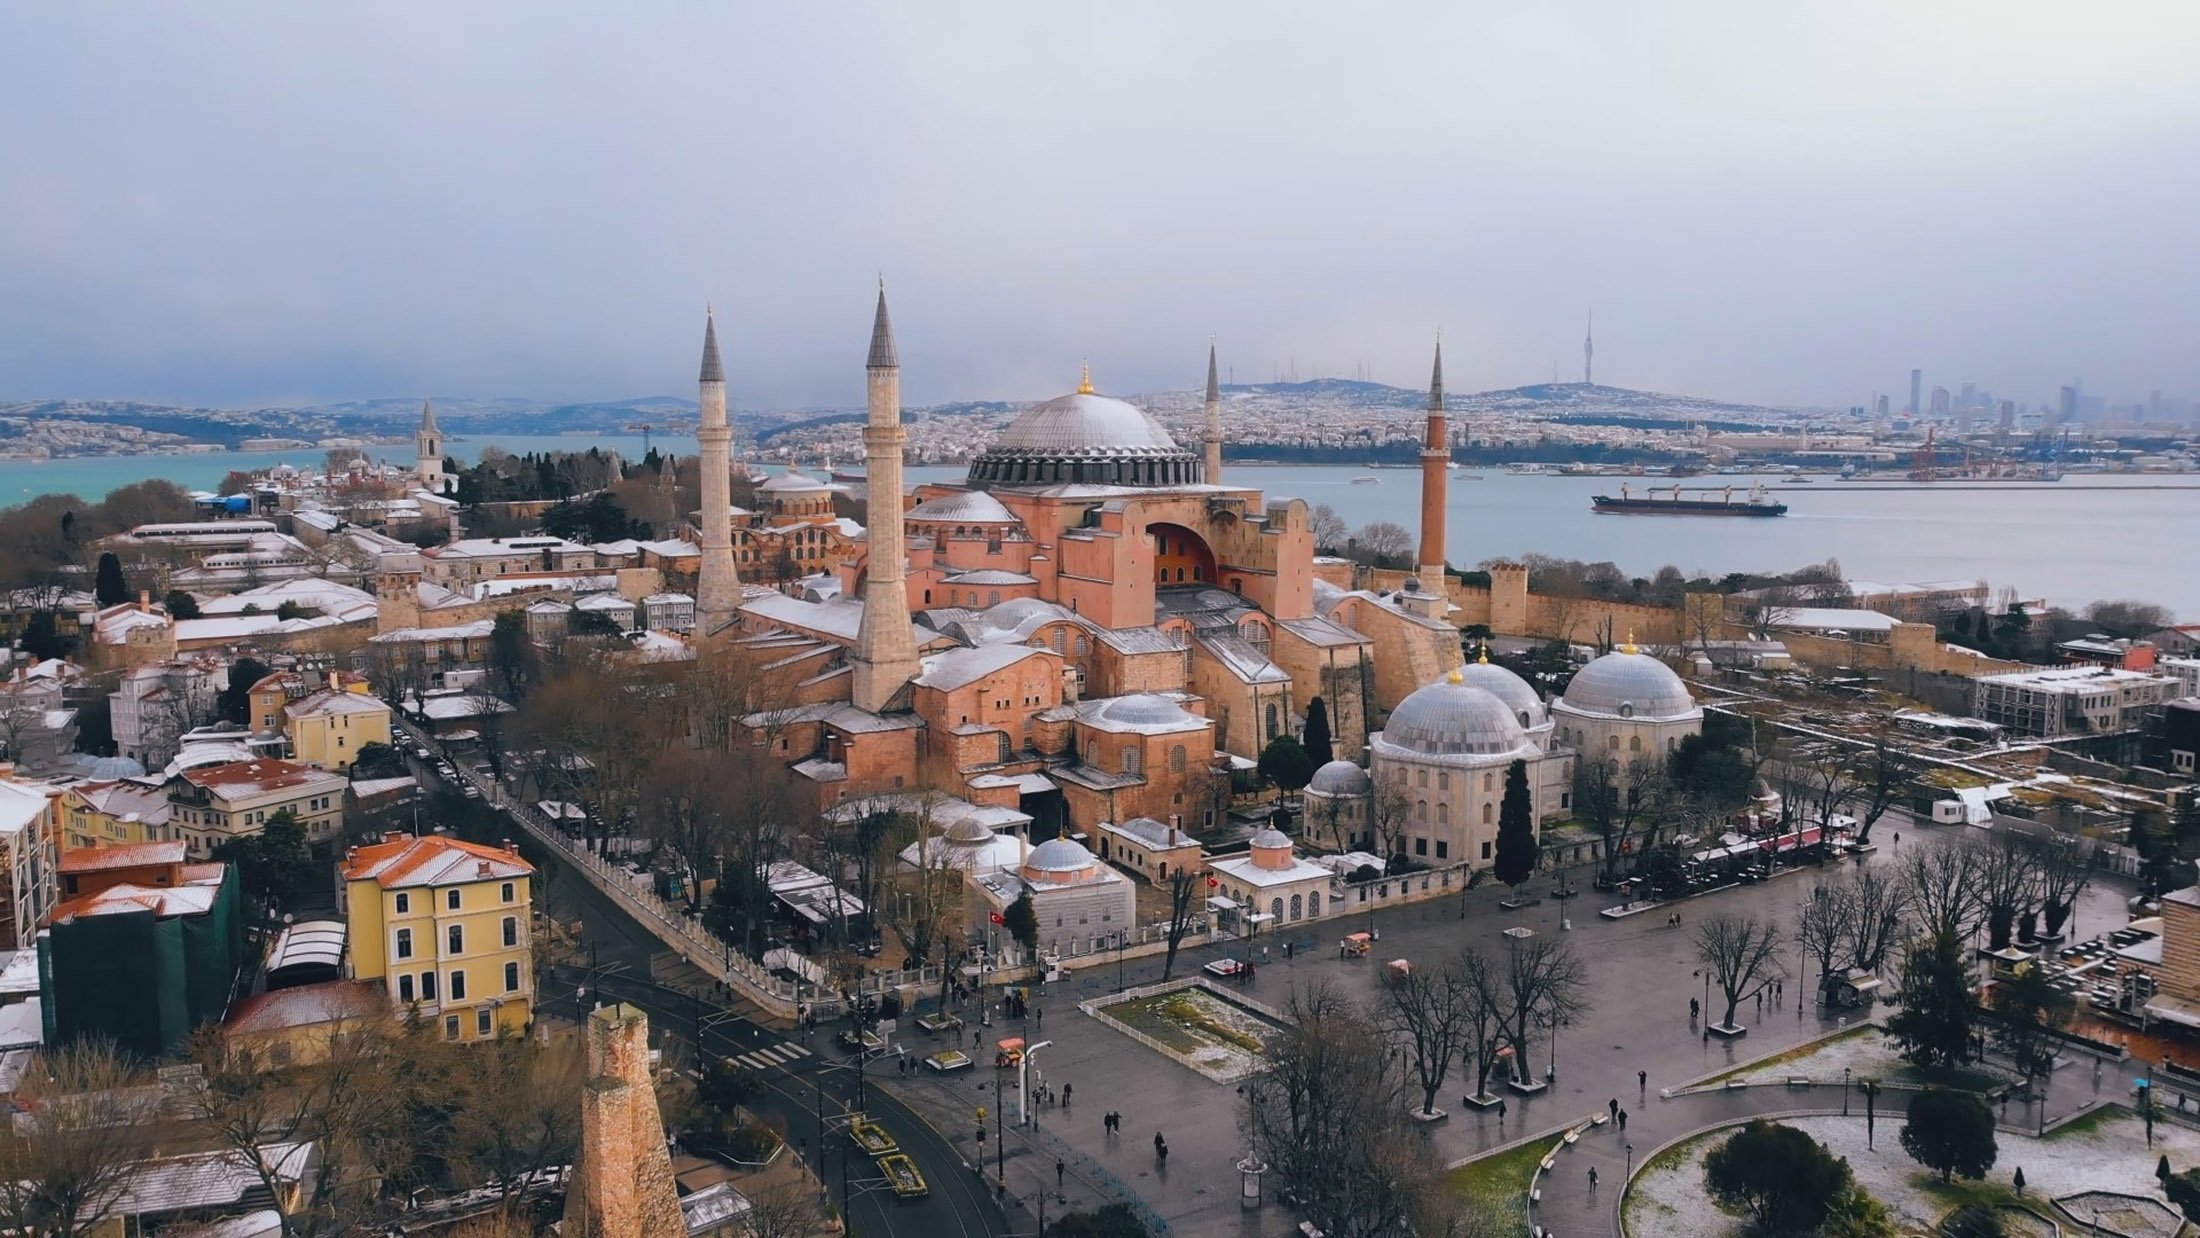 Top 10 historical places to visit in Istanbul | Daily Sabah